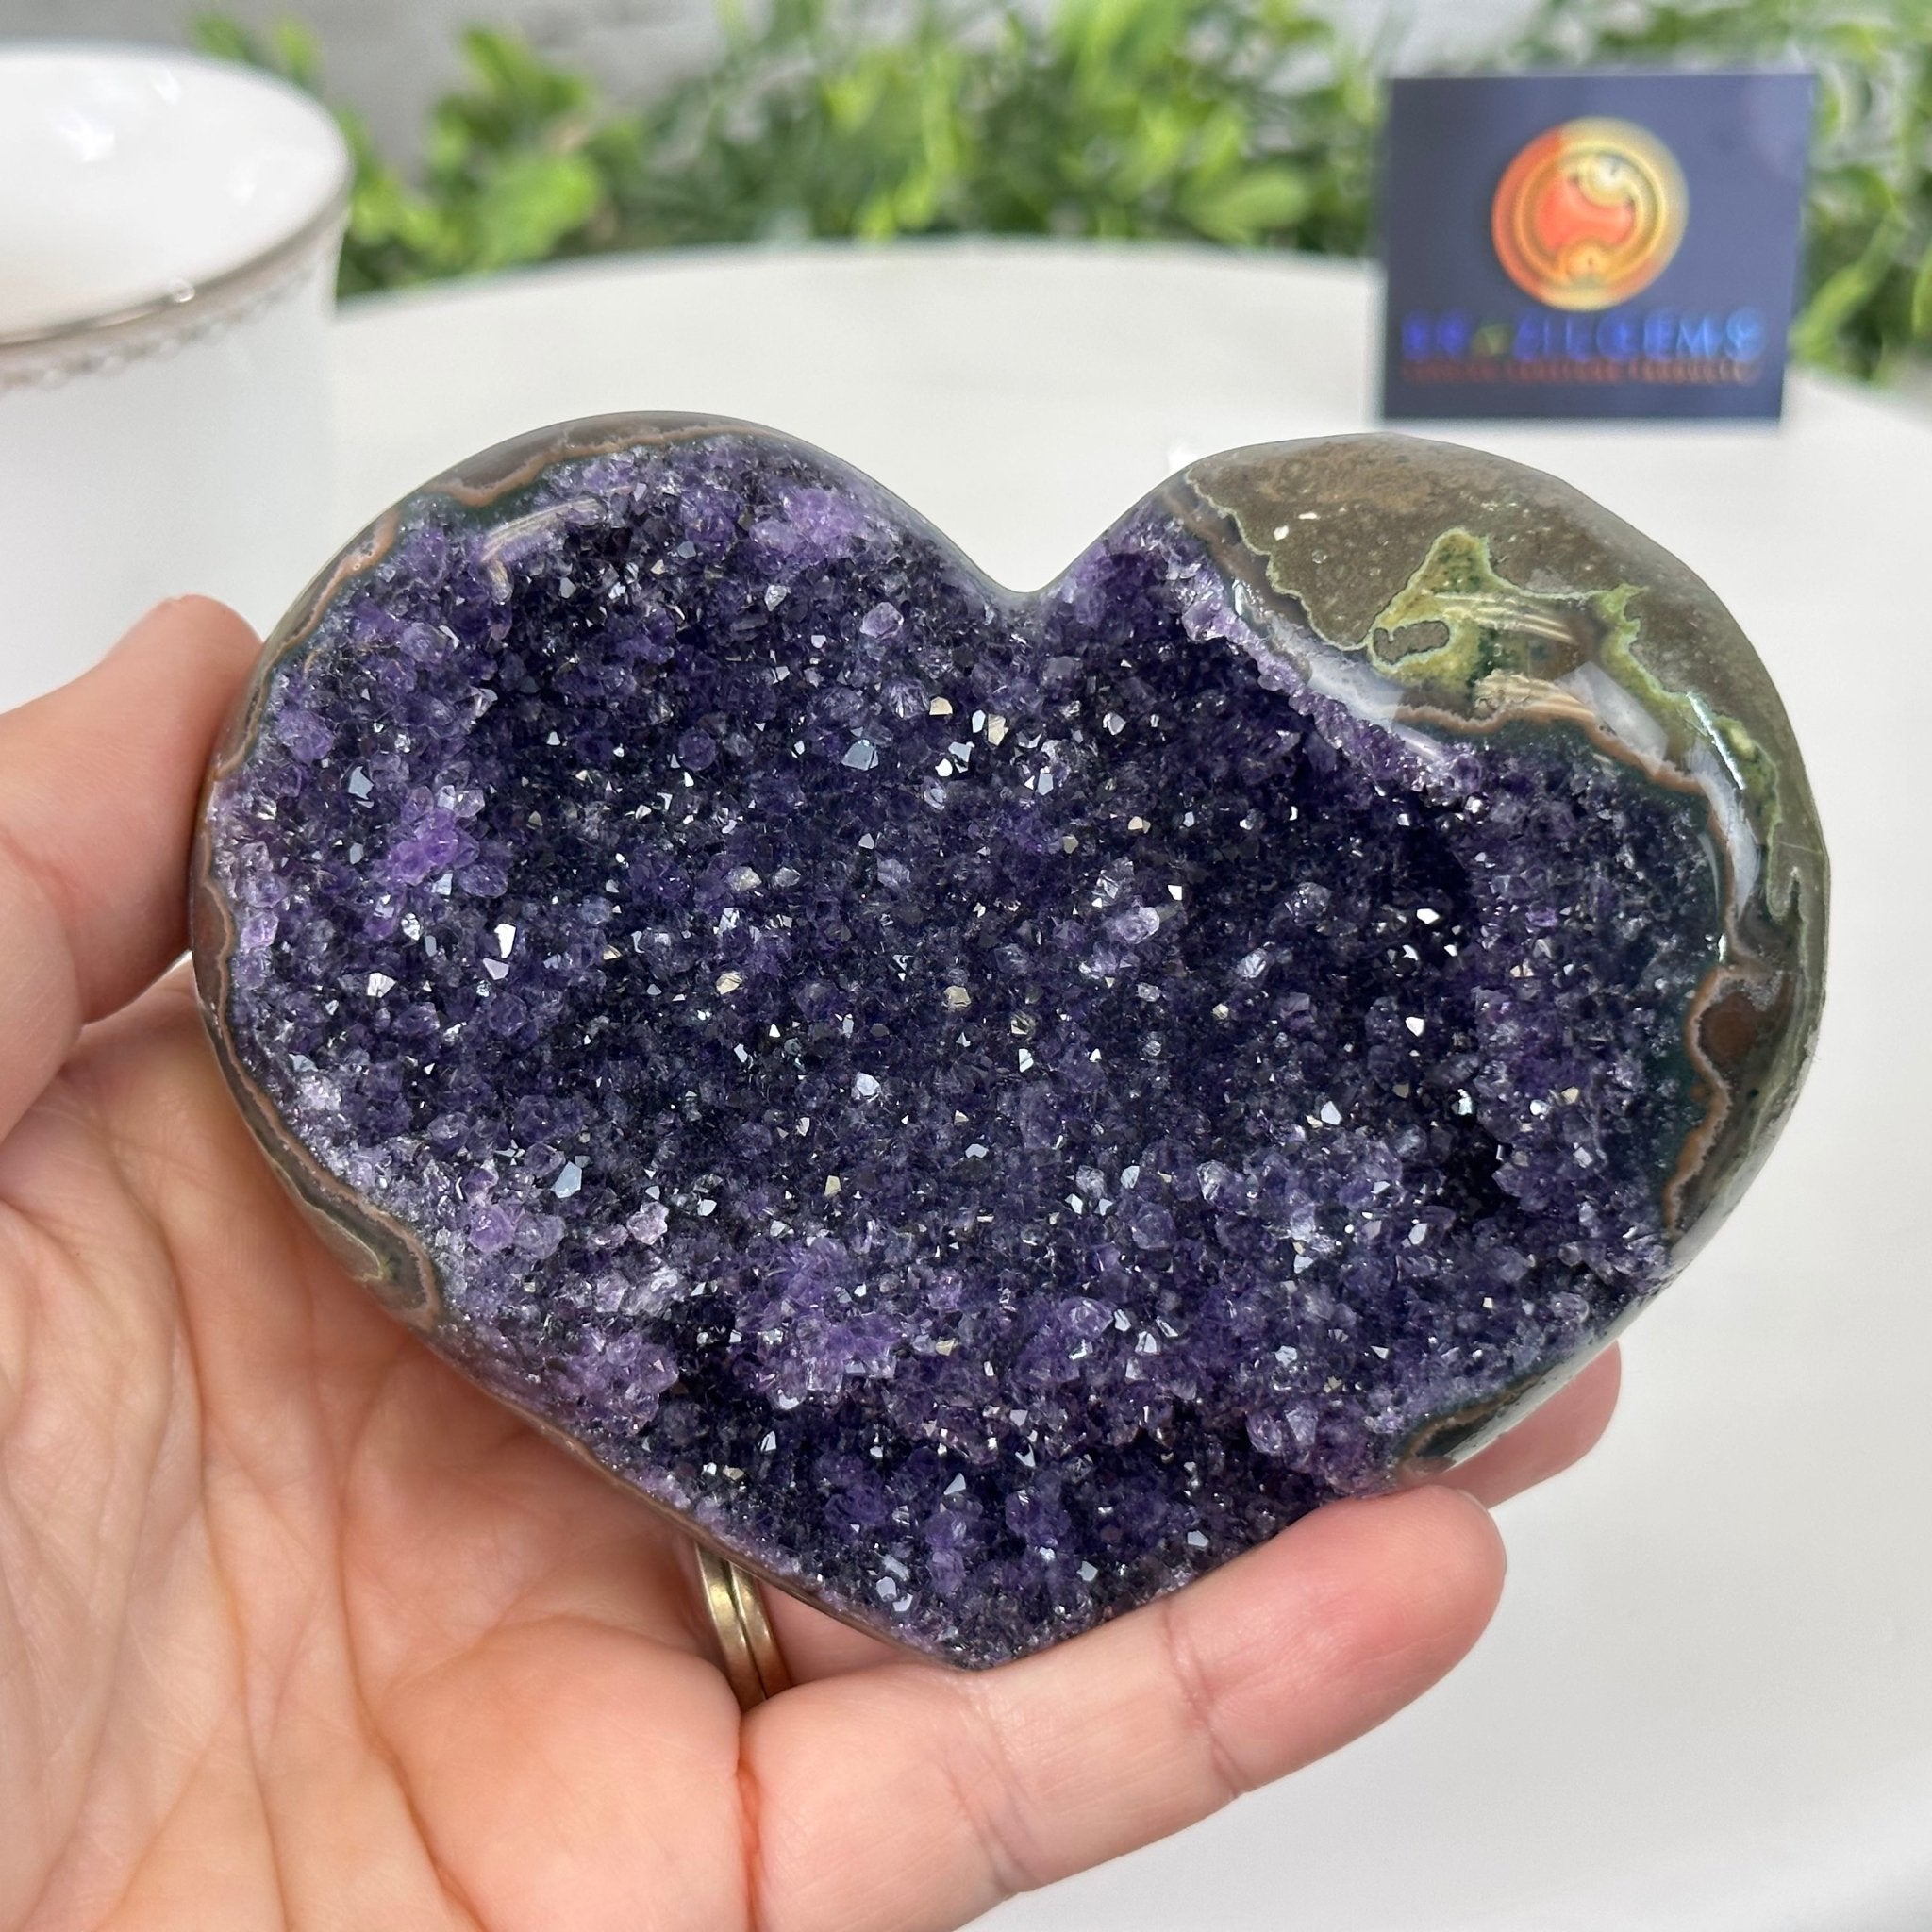 Extra Quality Amethyst Heart Geode on an Acrylic Stand 0.89 lbs & 2.75" Tall #5462-0094 by Brazil Gems - Brazil GemsBrazil GemsExtra Quality Amethyst Heart Geode on an Acrylic Stand 0.89 lbs & 2.75" Tall #5462-0094 by Brazil GemsHearts5462-0094